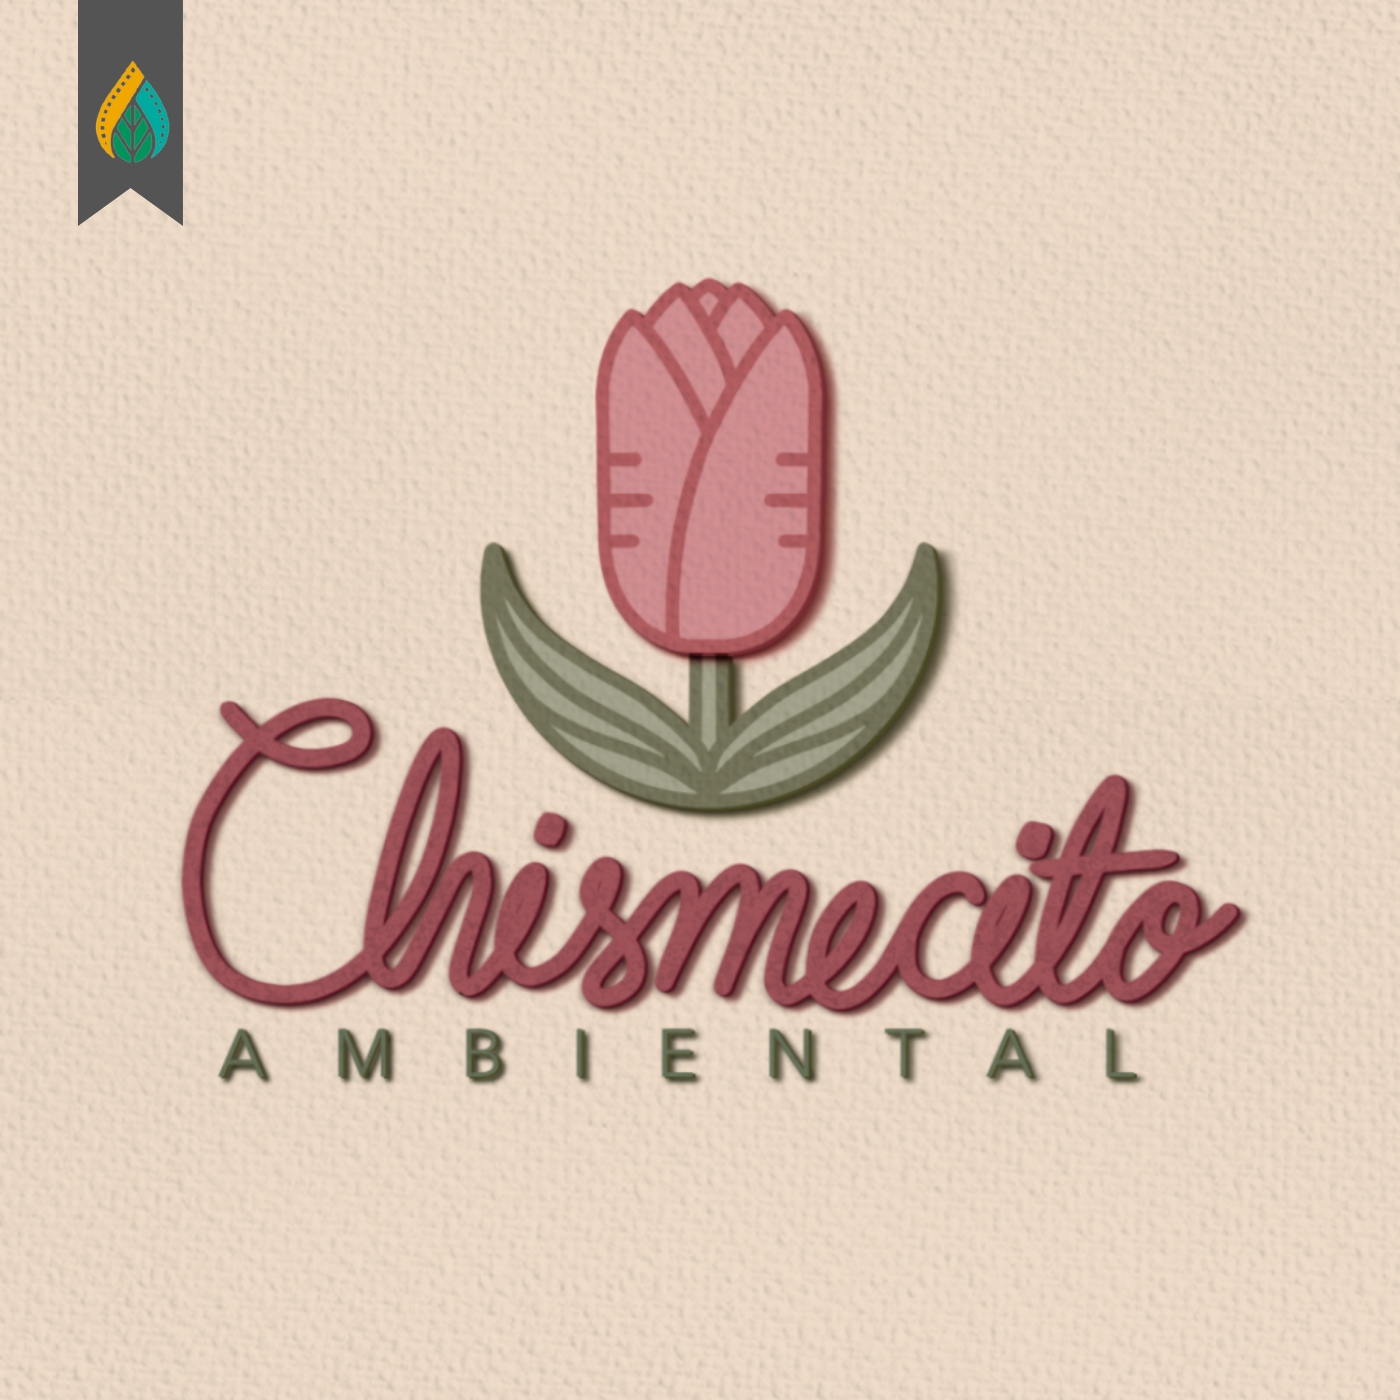 Chismecito Ambiental